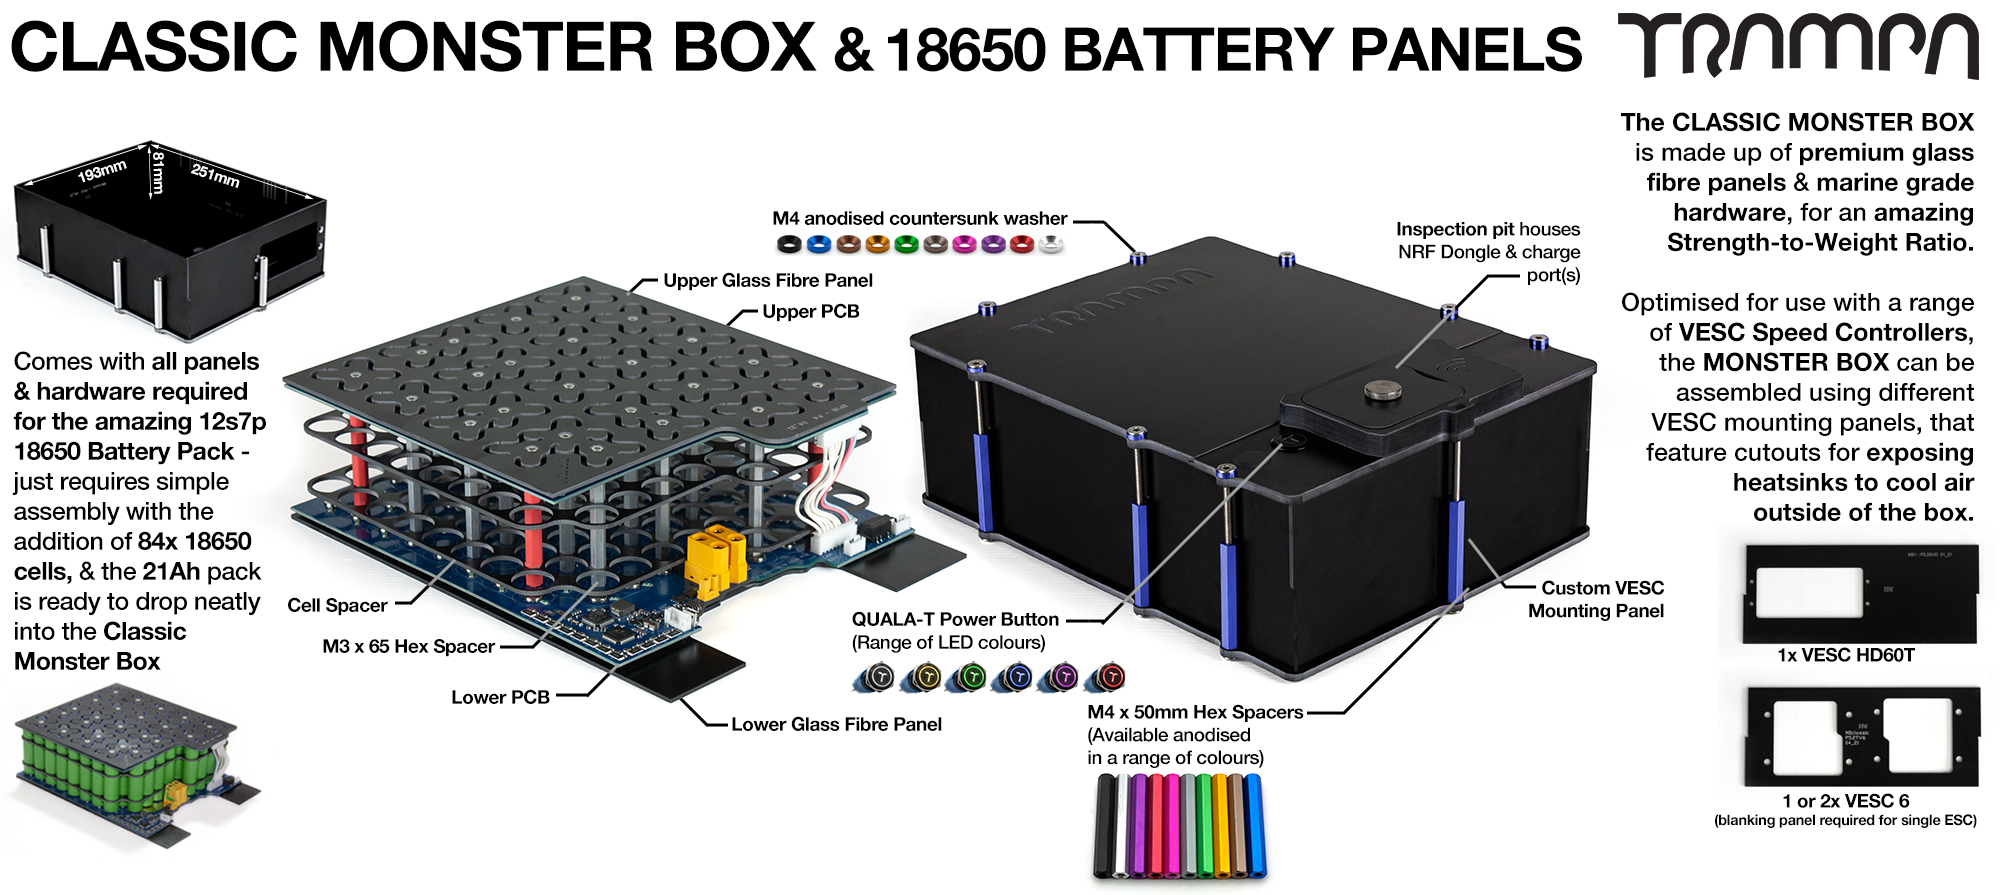 Classic MONSTER Box MkV supplied with a 18650 PCB based Battery Pack with Integrated Battery Management System (BMS) - NO VESC & NO Cells